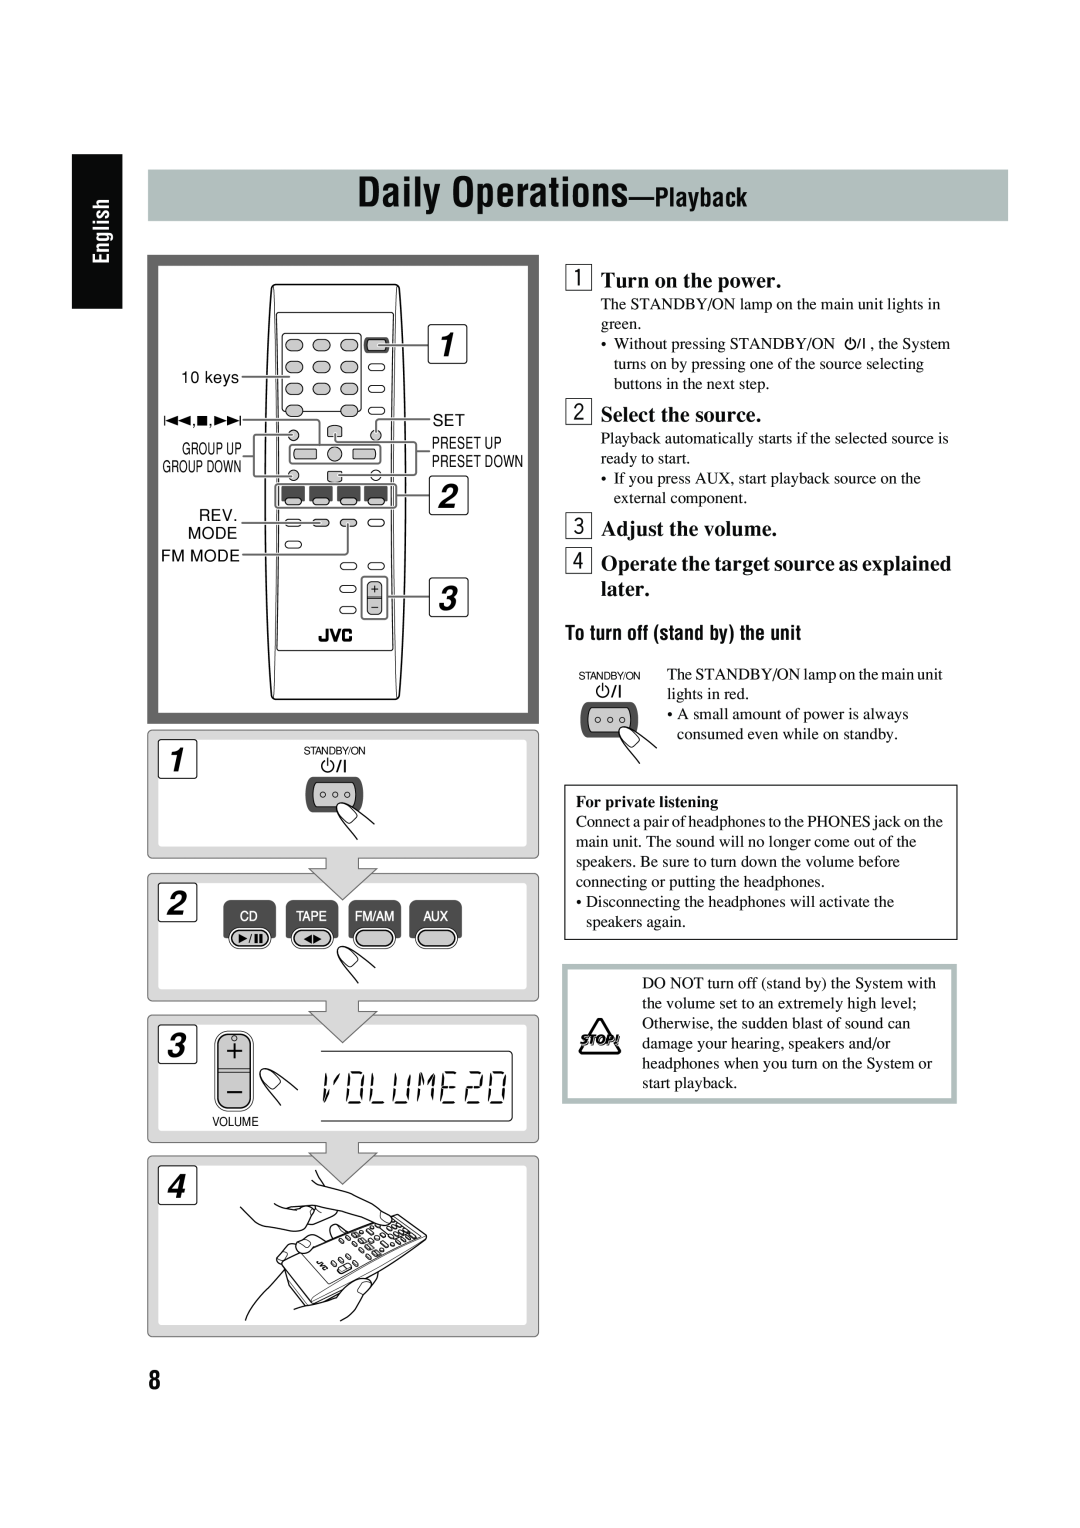 JVC UX-P400 manual English, For private listening 